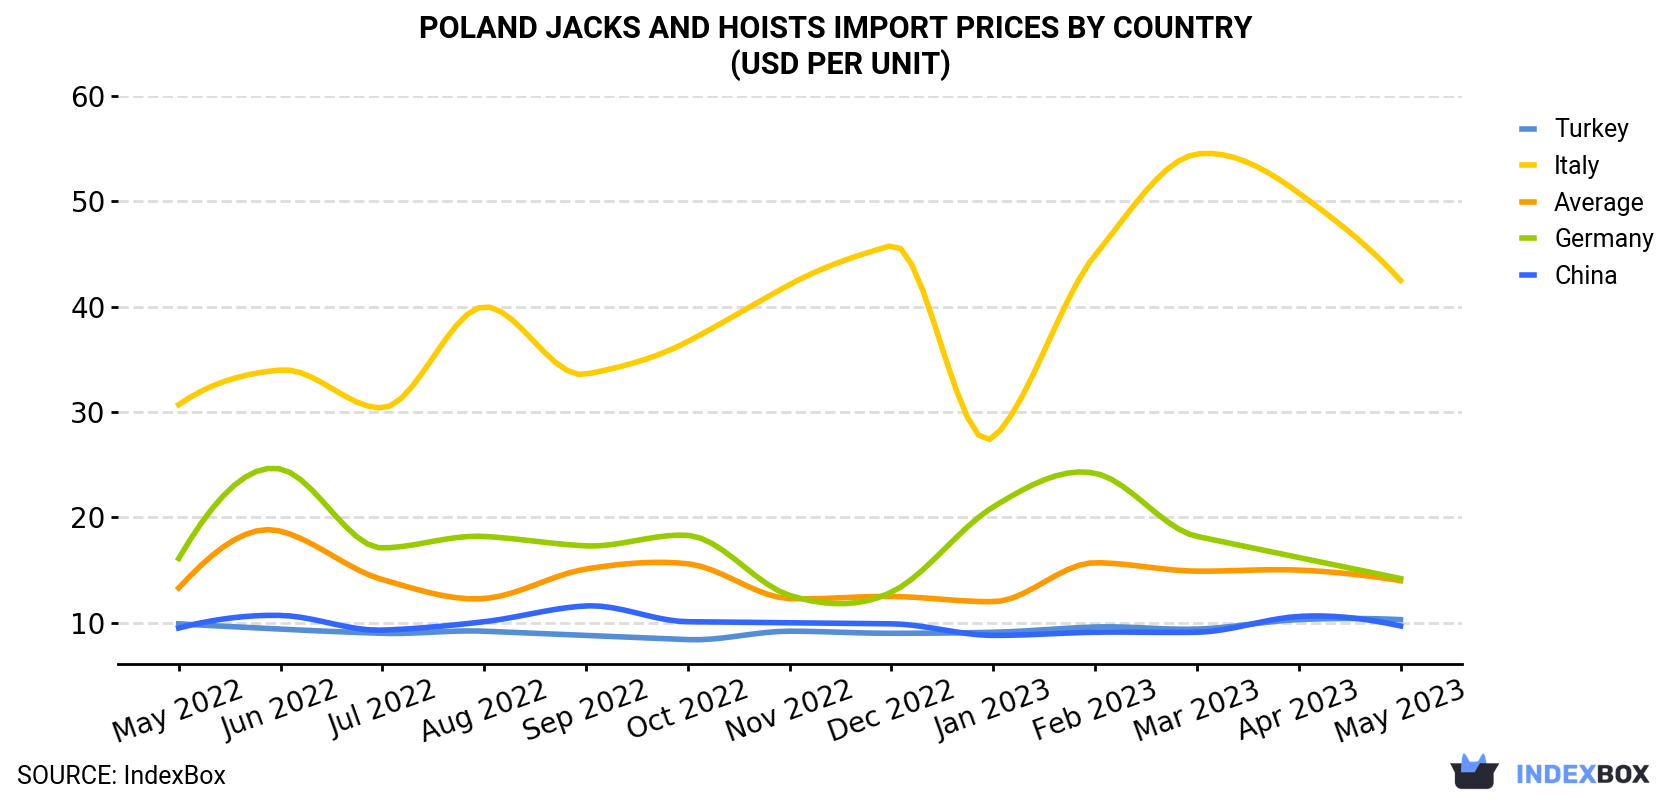 Poland Jacks And Hoists Import Prices By Country (USD Per Unit)